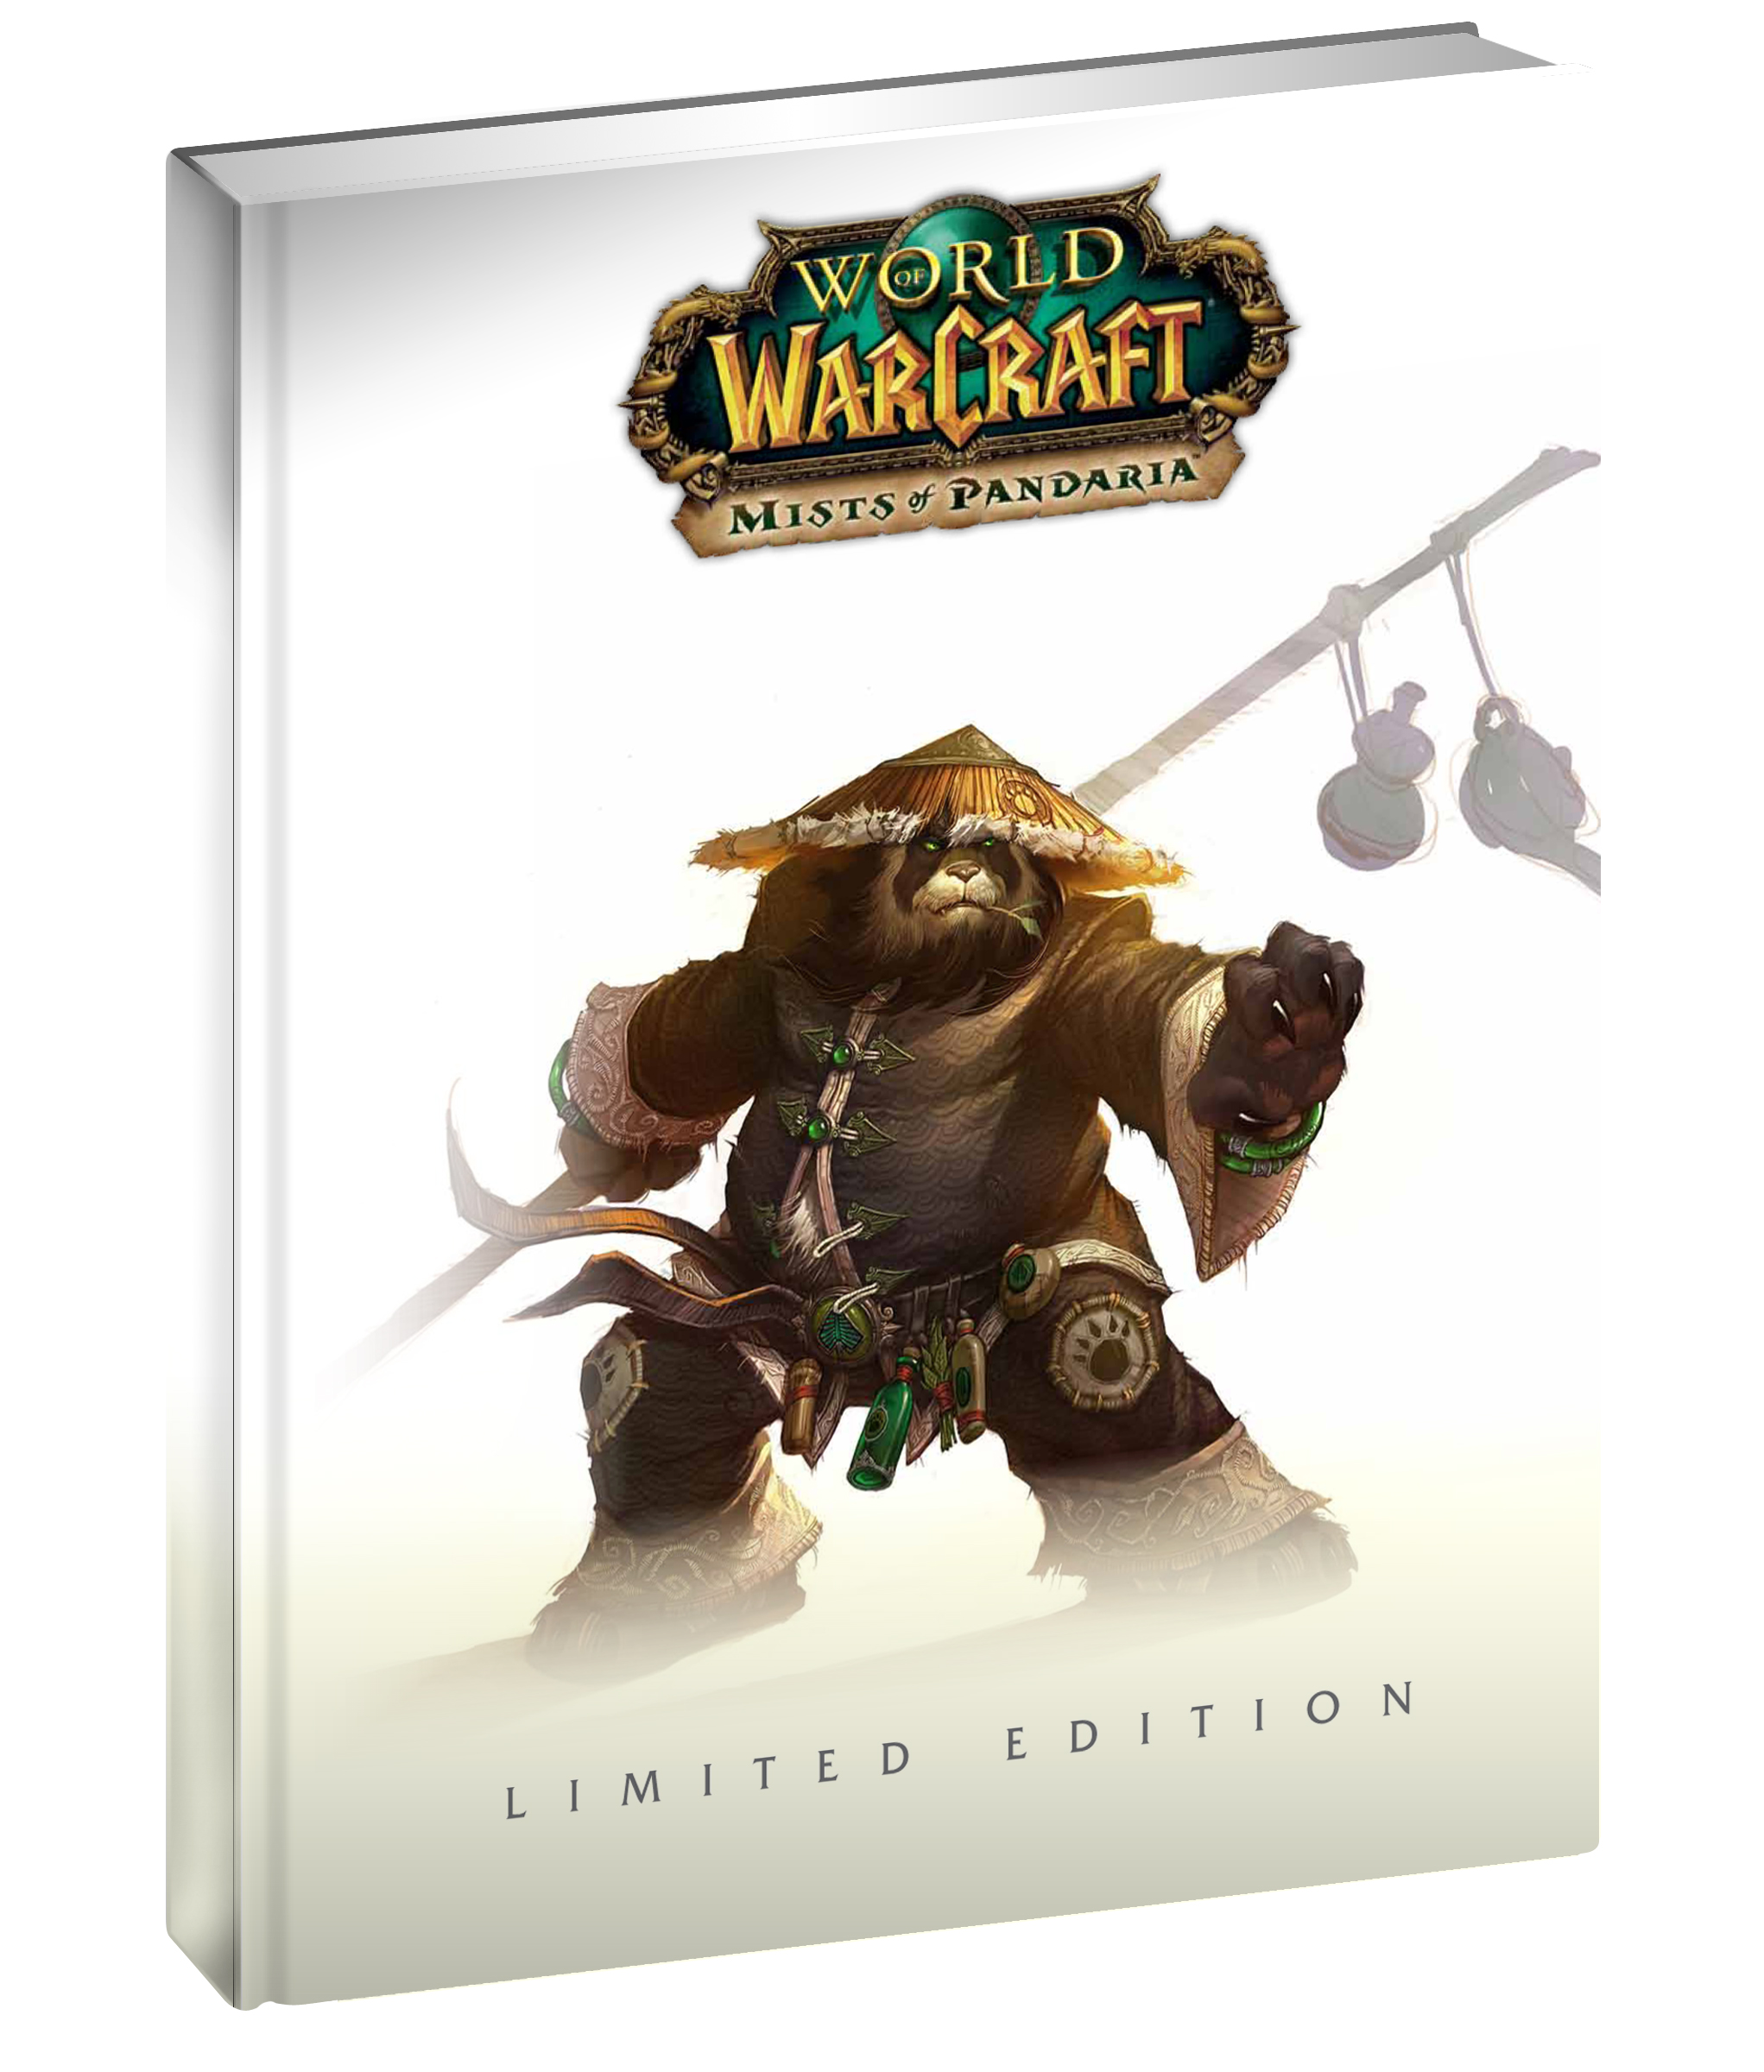  World of Warcraft�: Mists of Pandaria Strategy Guide Revealed